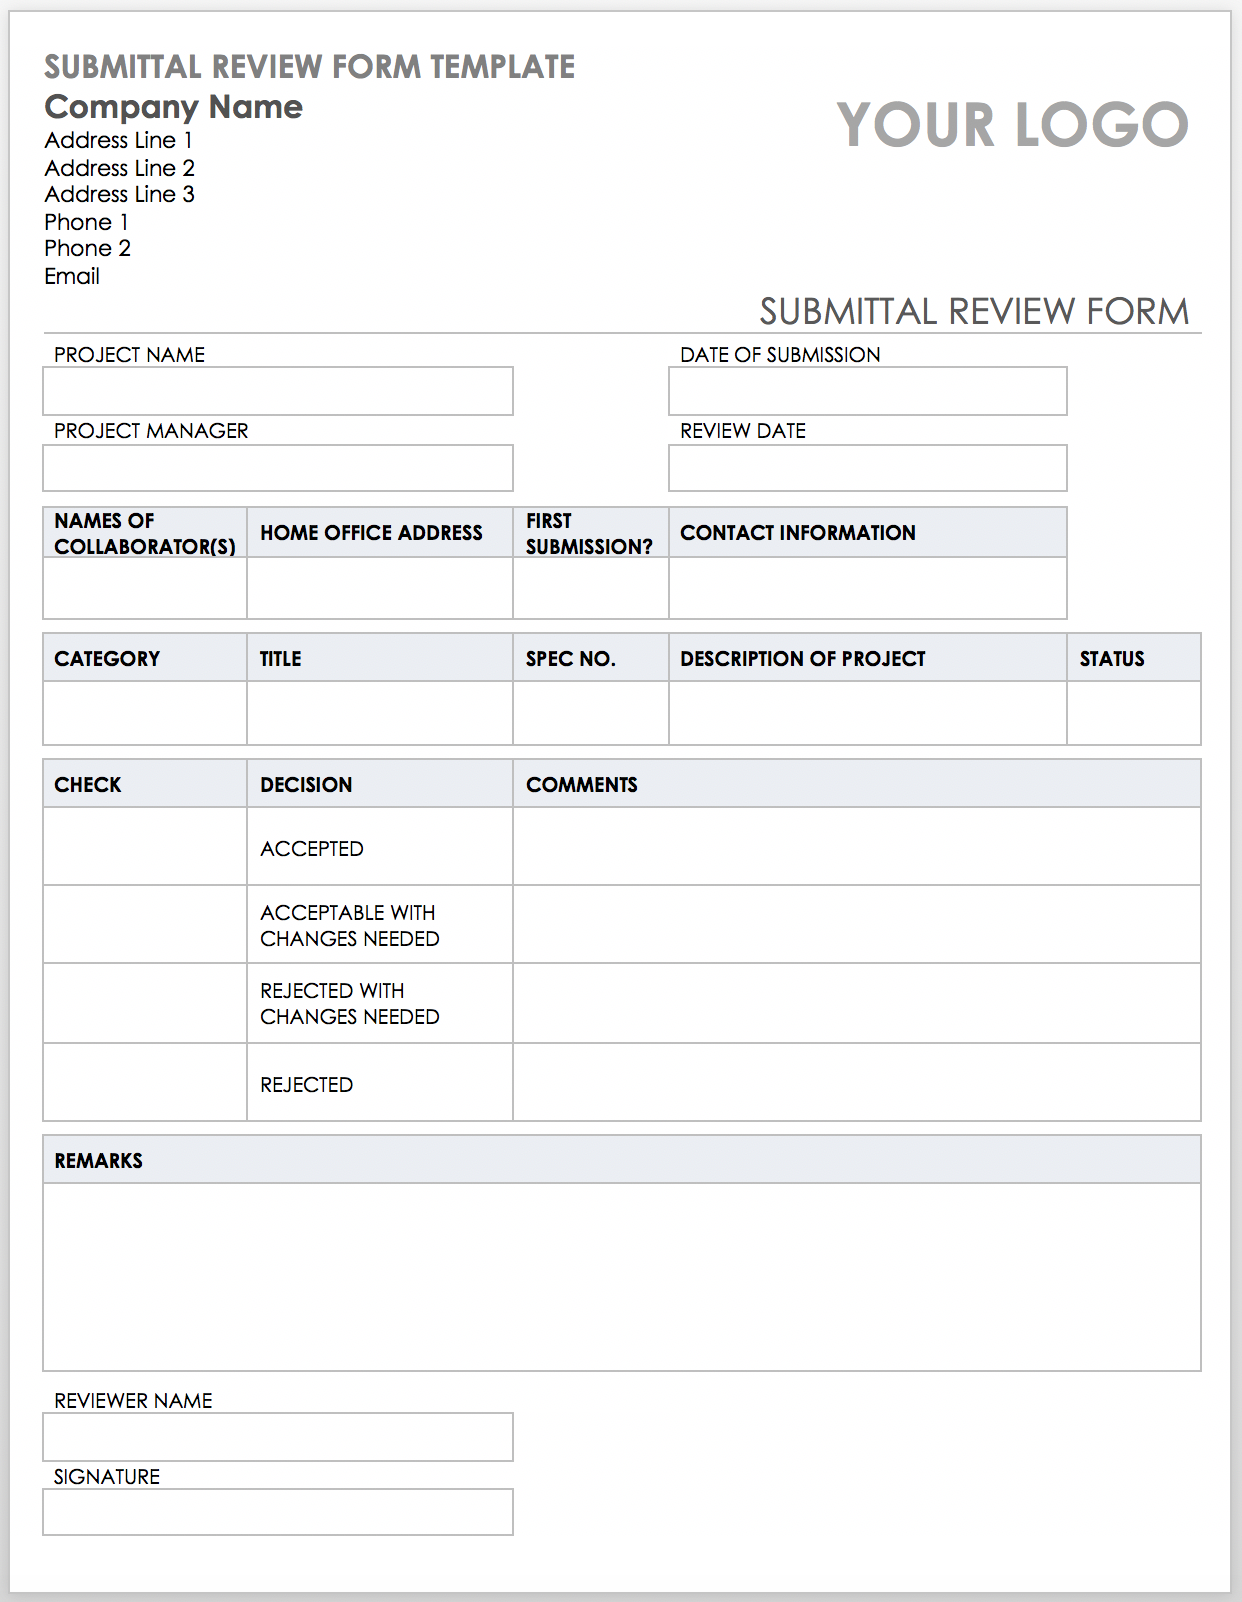 Free Construction Submittal Form Template PRINTABLE TEMPLATES